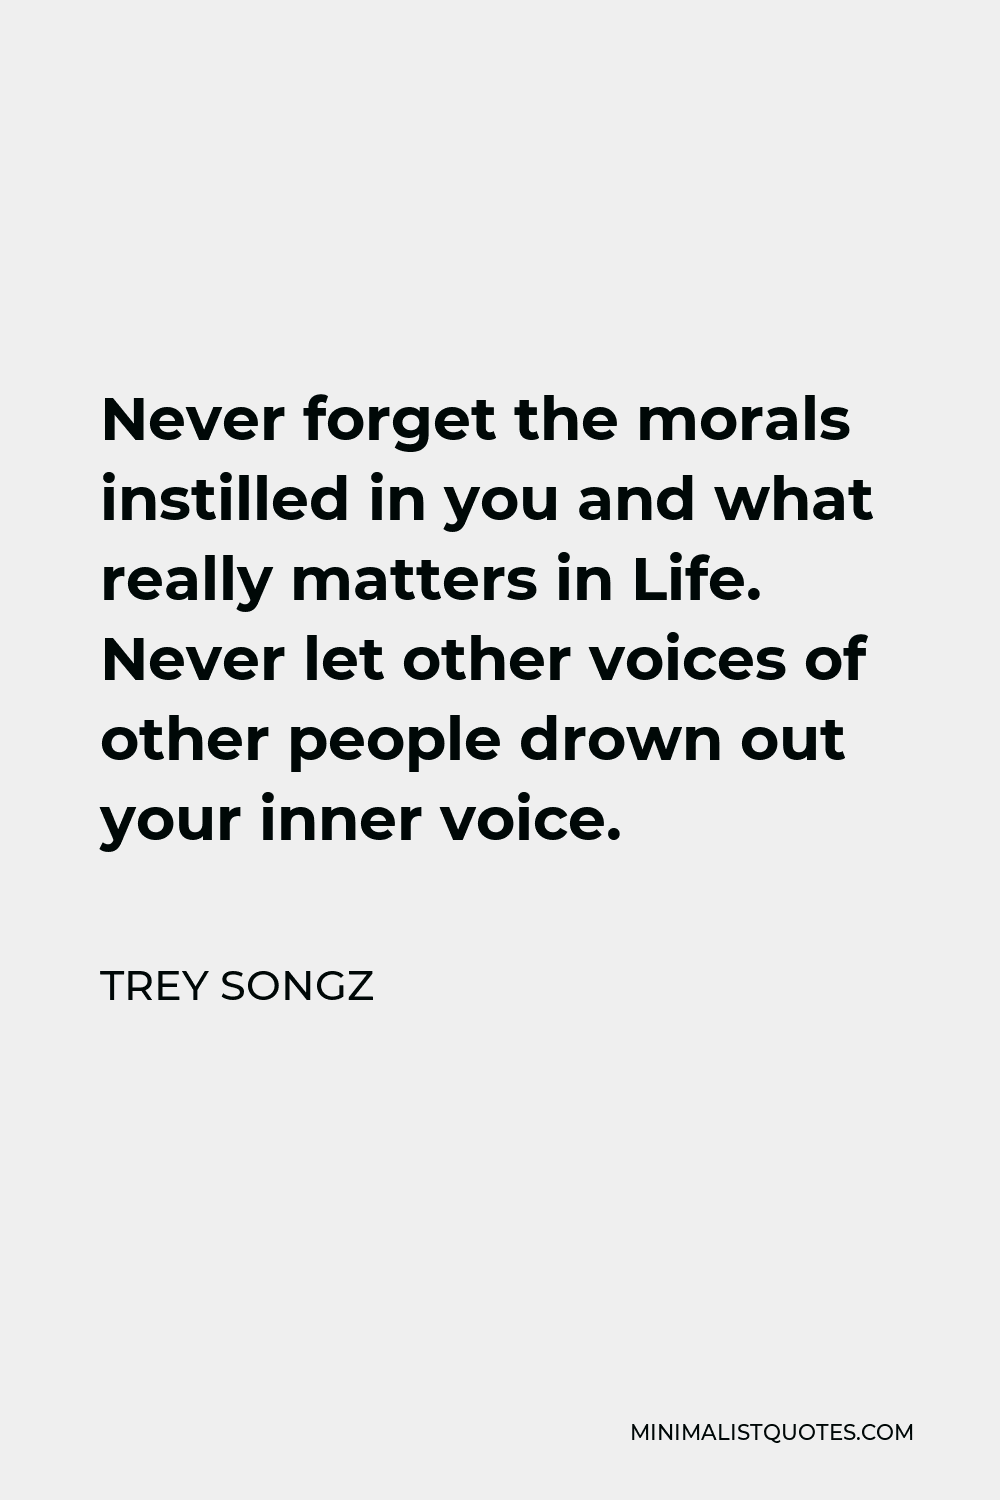 Trey Songz Quote - Never forget the morals instilled in you and what really matters in Life. Never let other voices of other people drown out your inner voice.